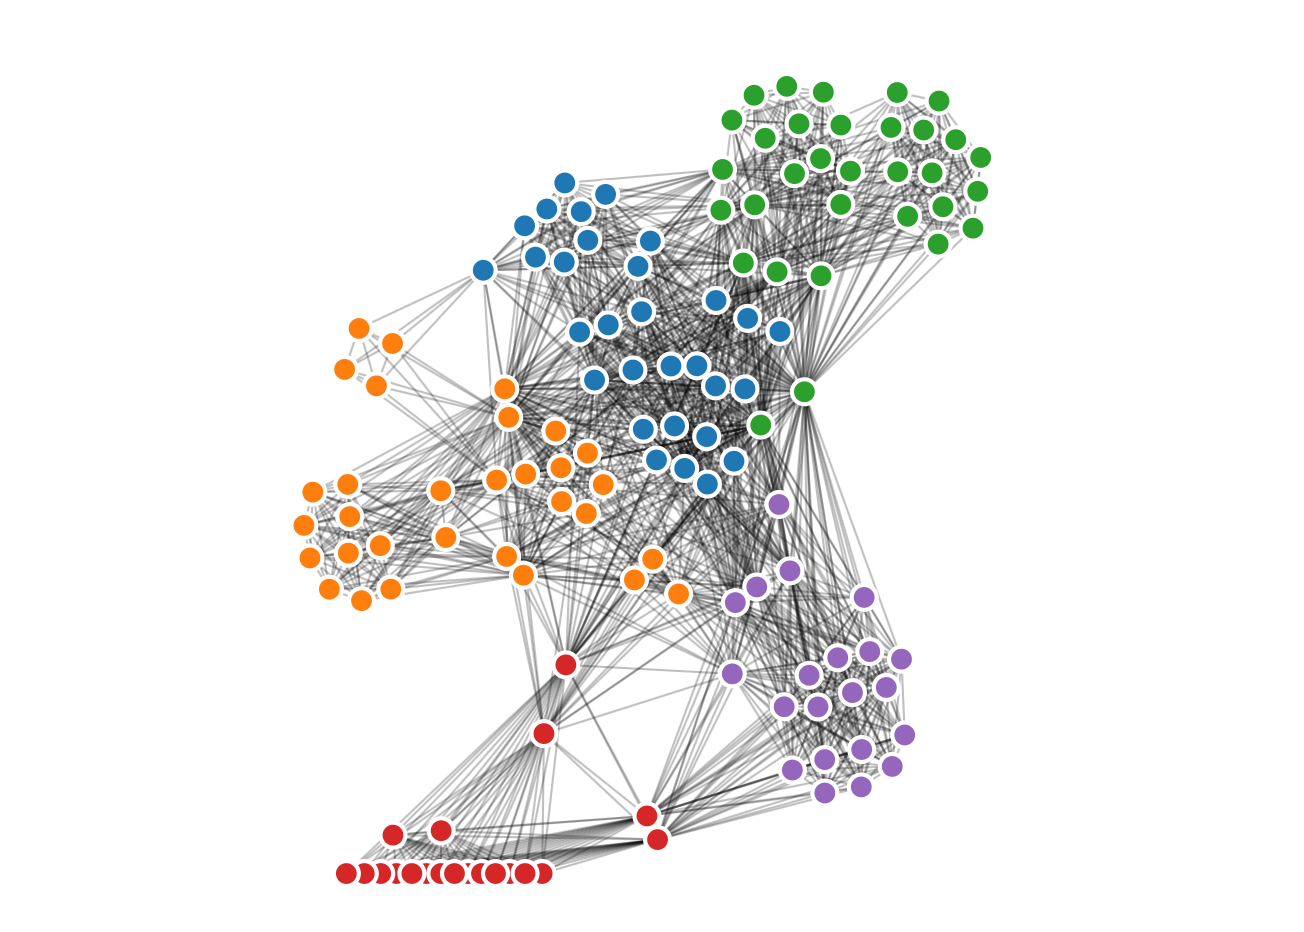 A network graph of all the characters in the Marvel Cinematic Universe